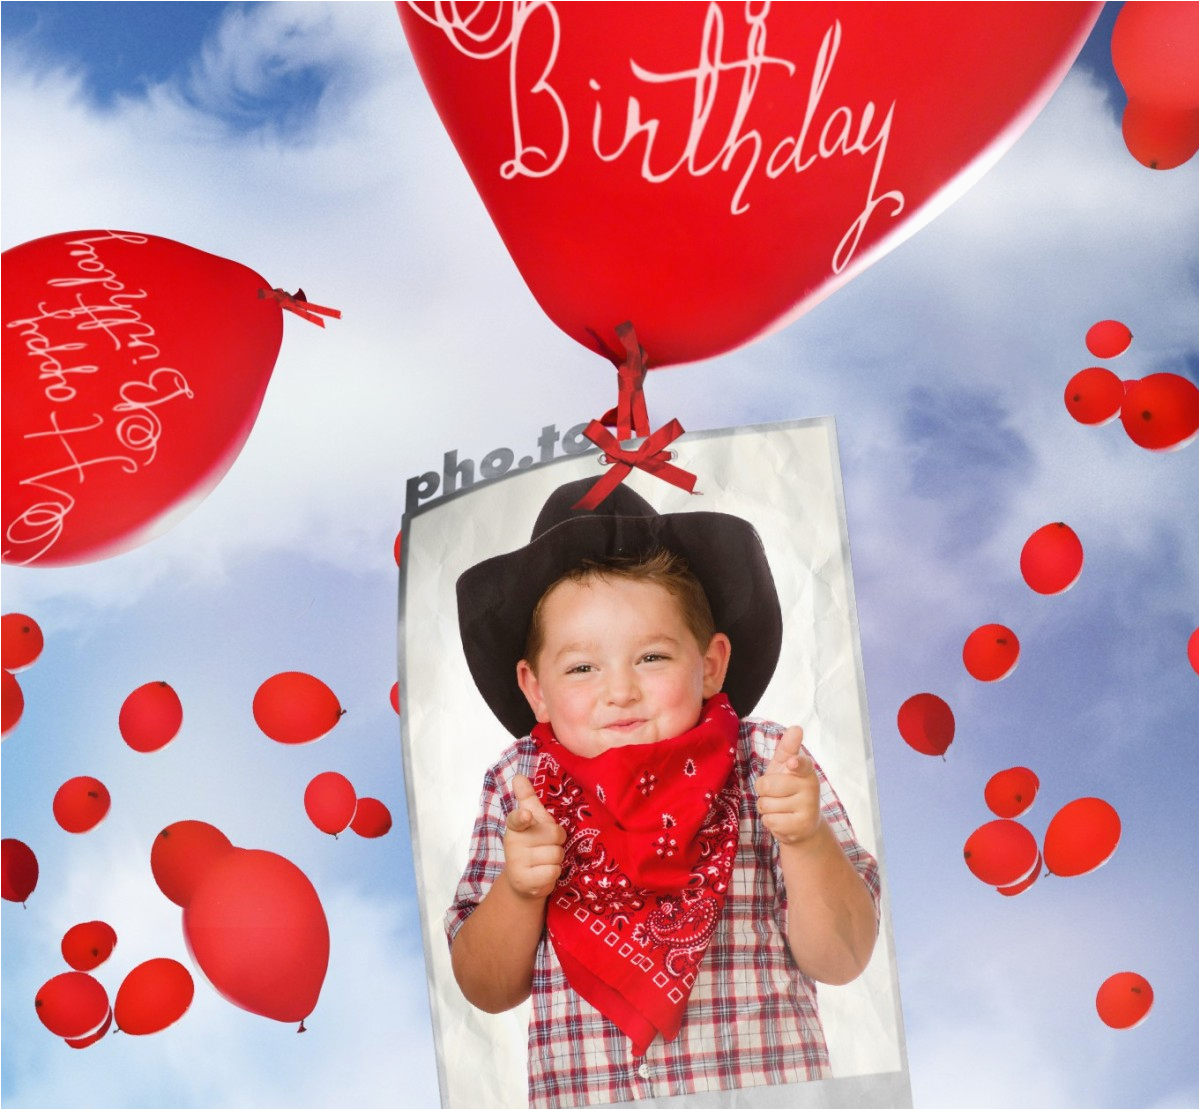 birthday card with flying balloons printable photo template